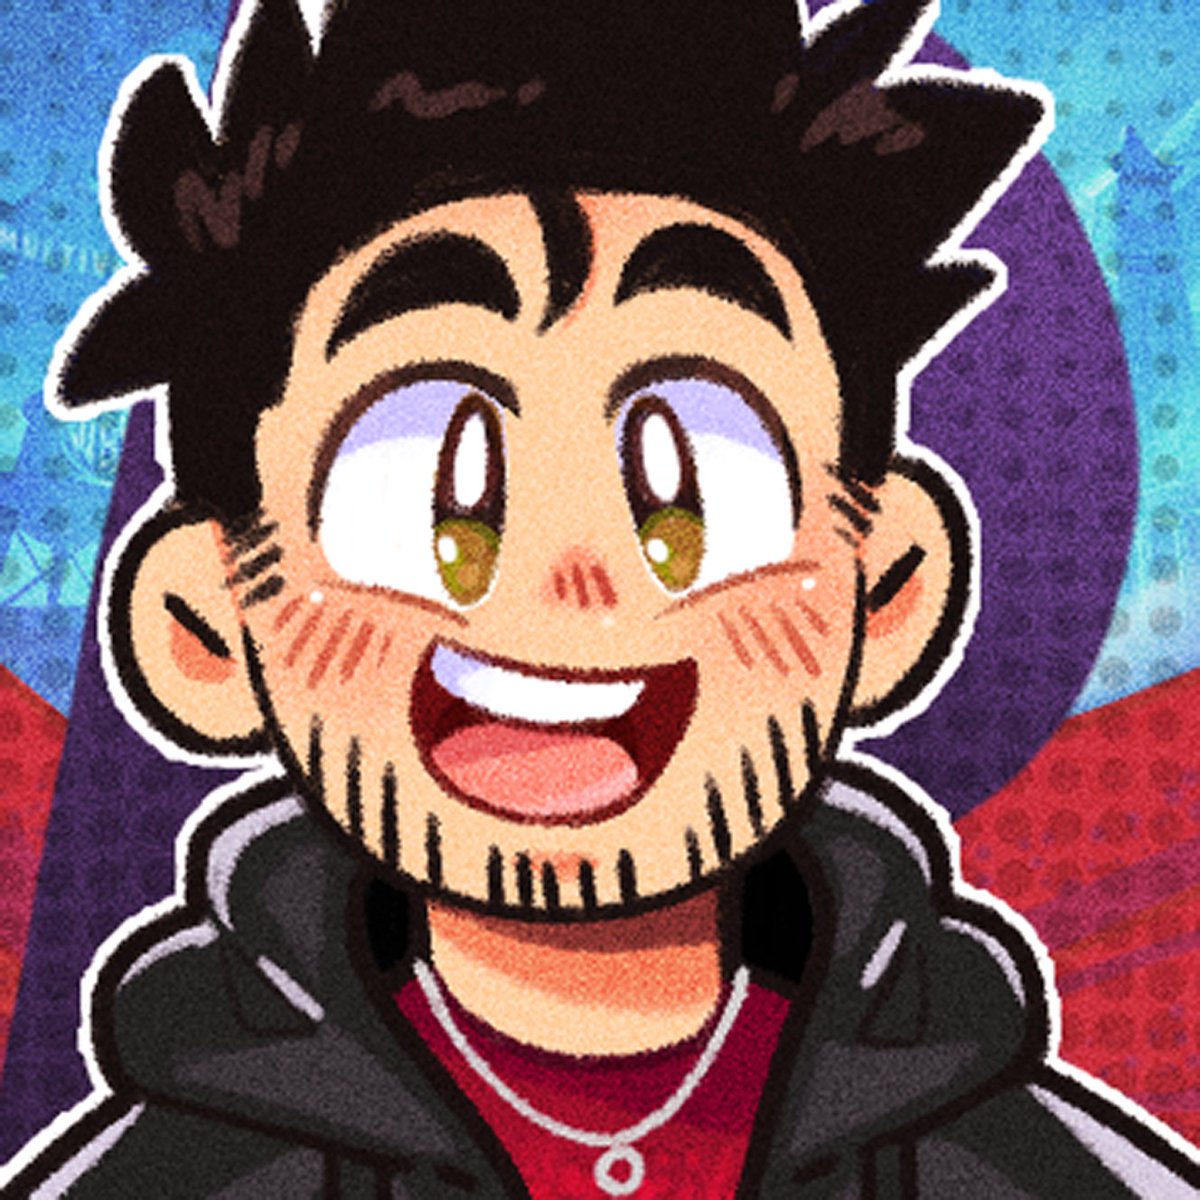 New profile picture for the hard workin boy @SonicpoX ❤️